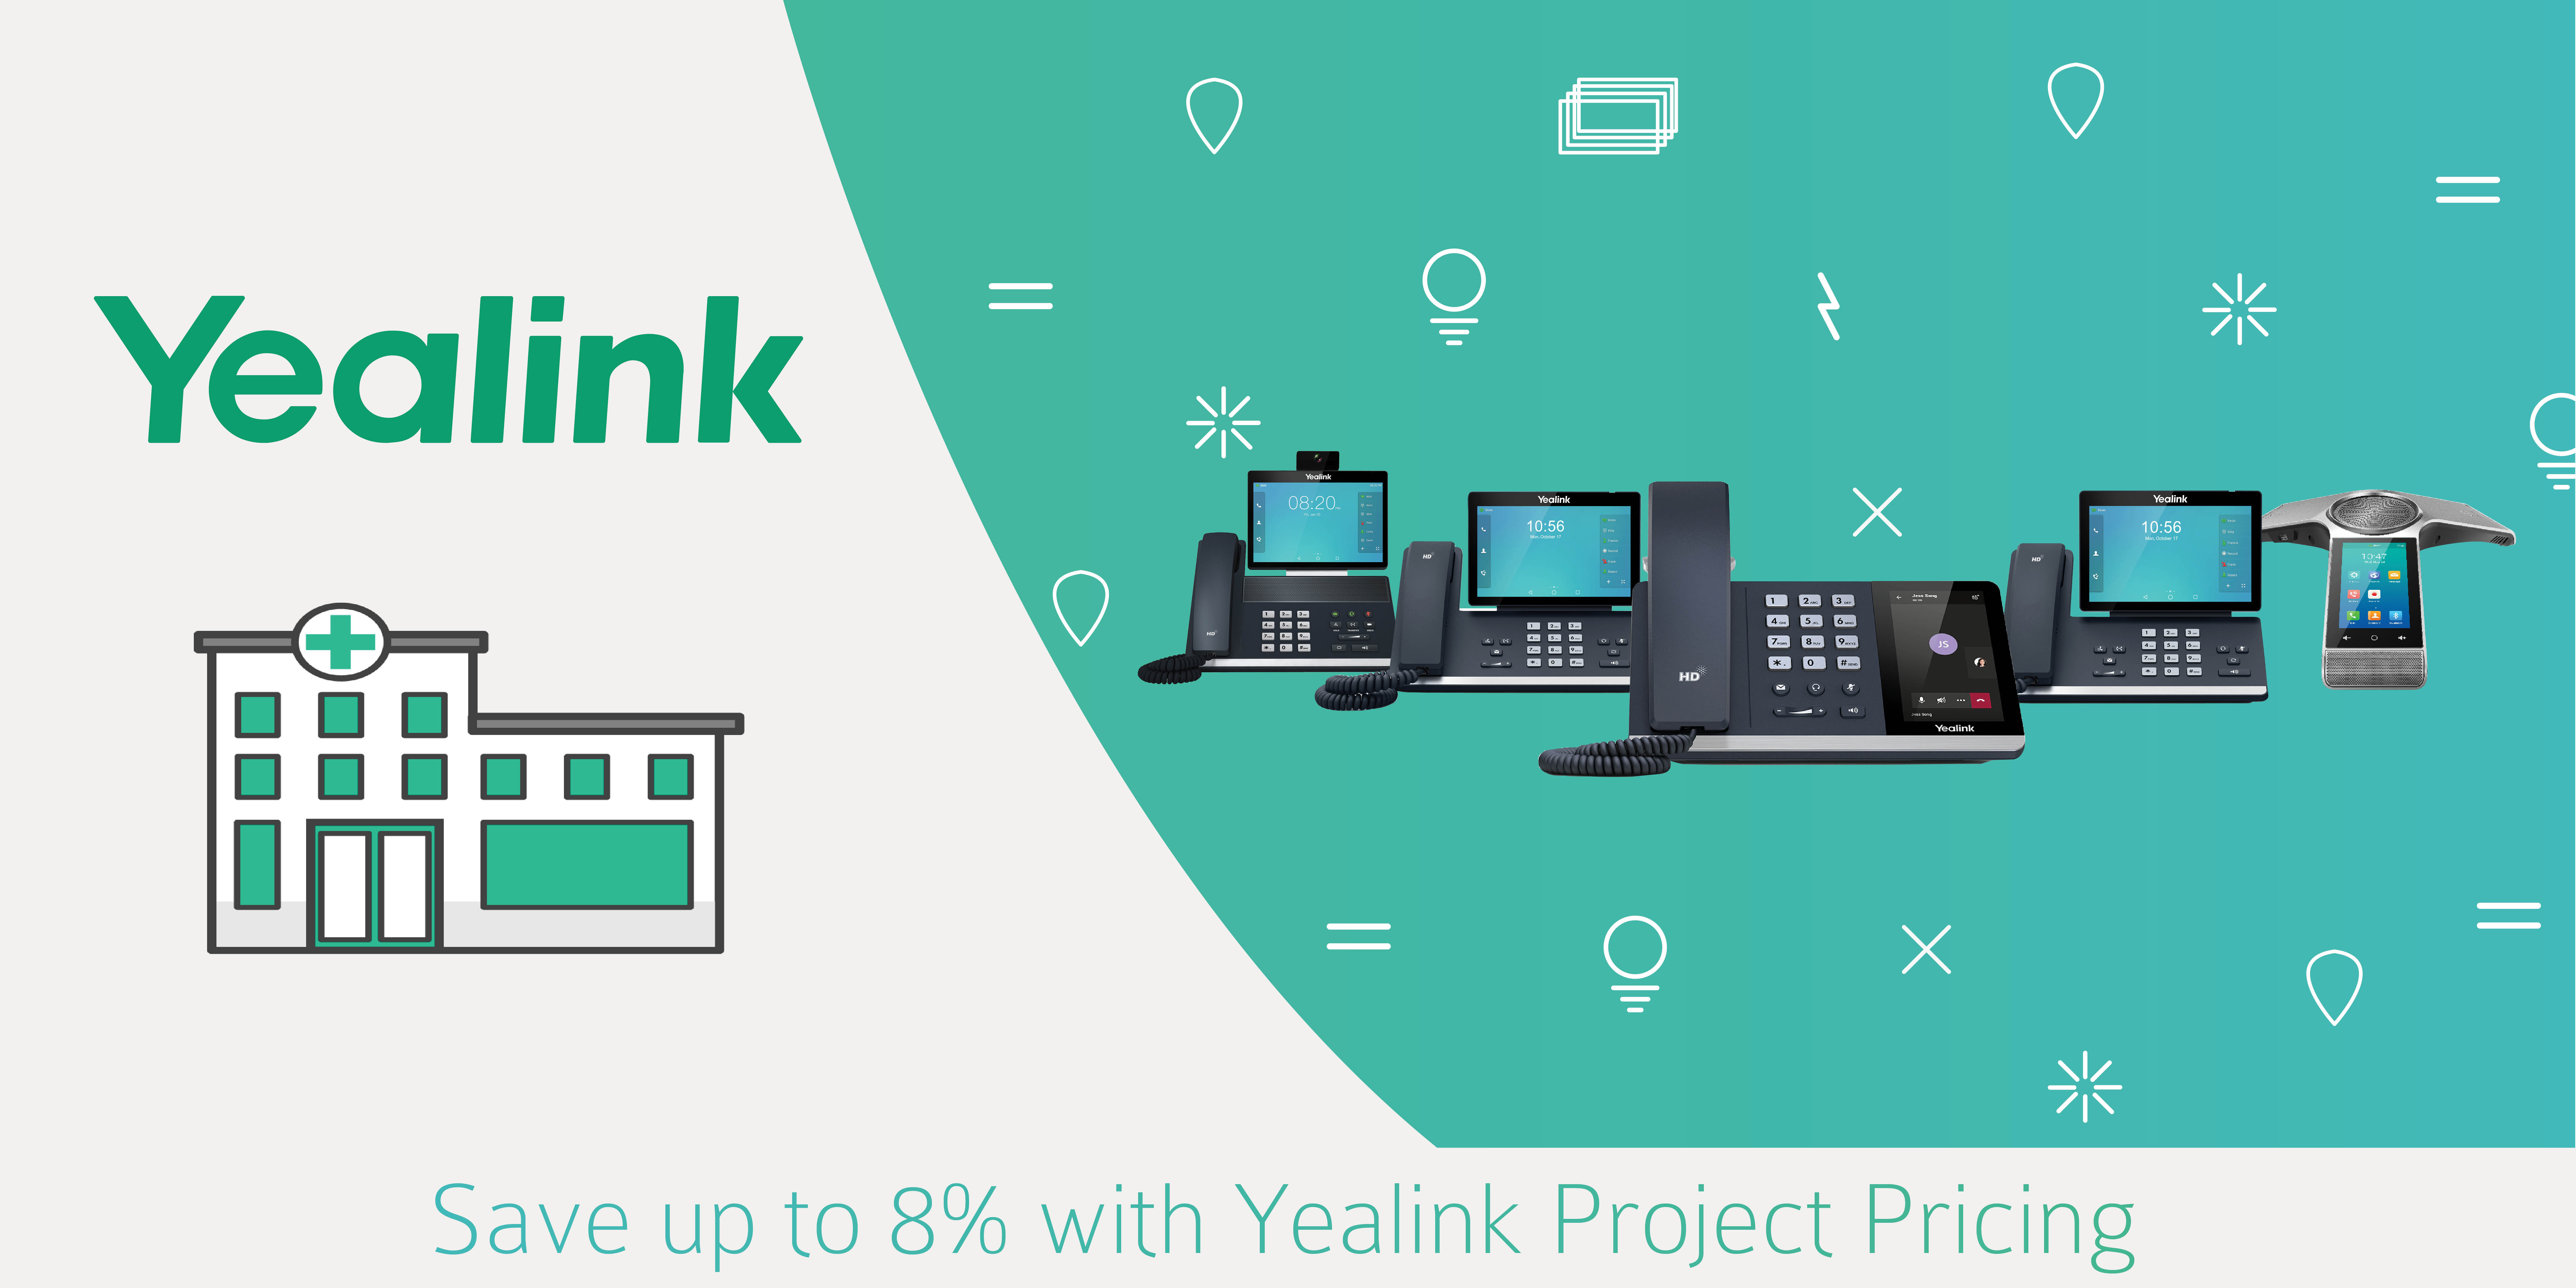 Yealink - COVID-19 Project Pricing Support